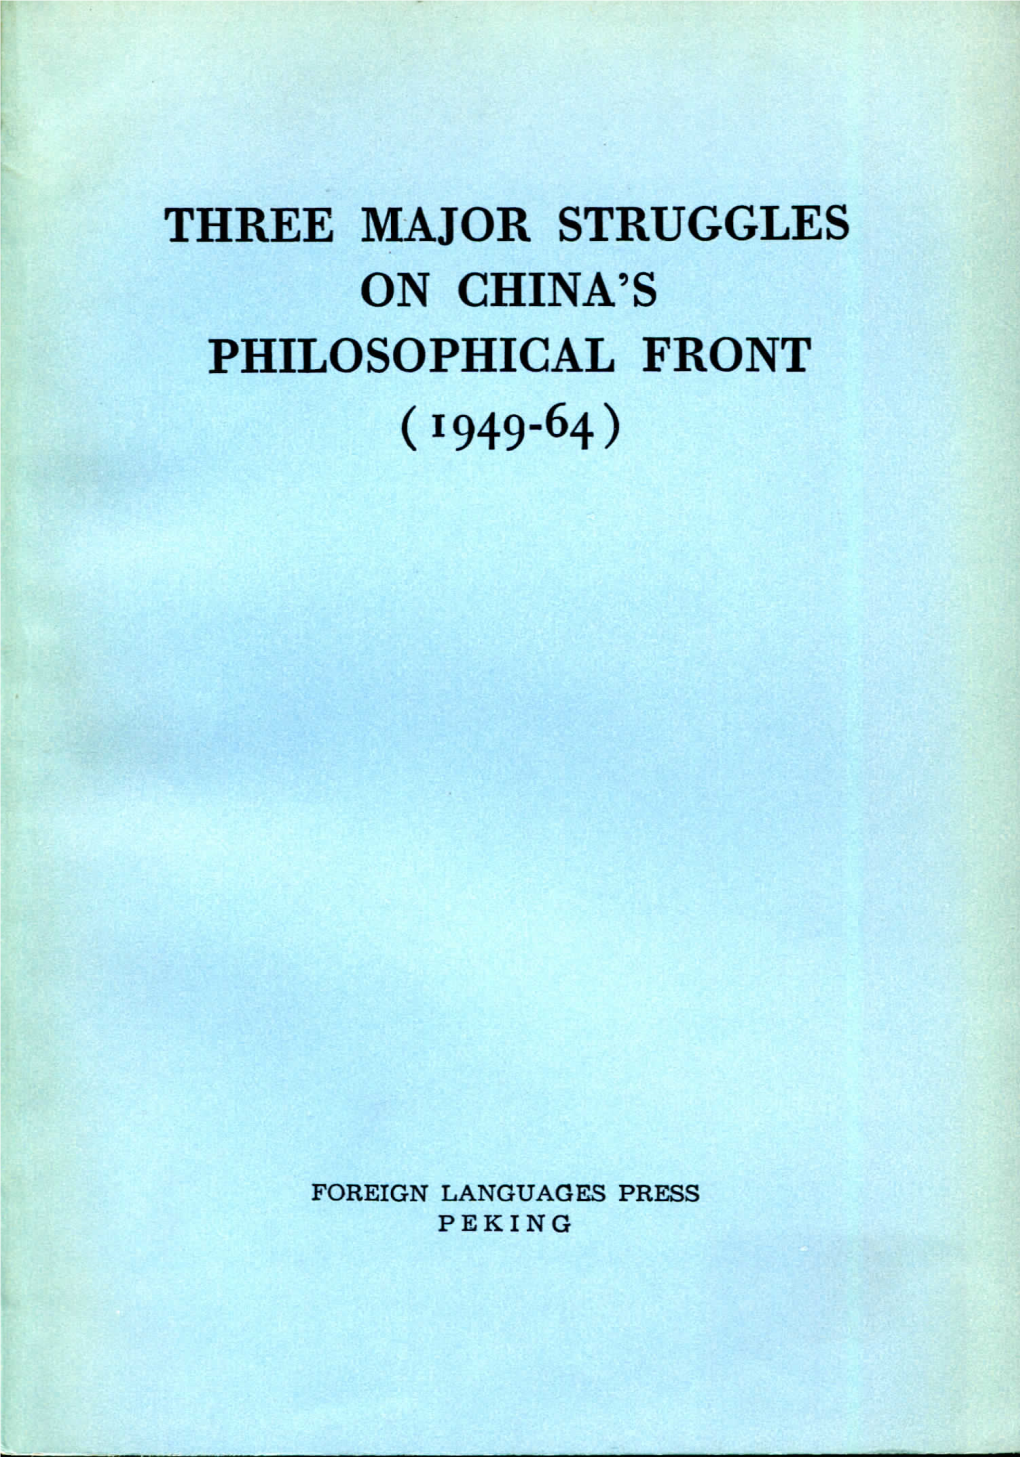 Three Major Struggles on China's Philosophical Front (1949-64)